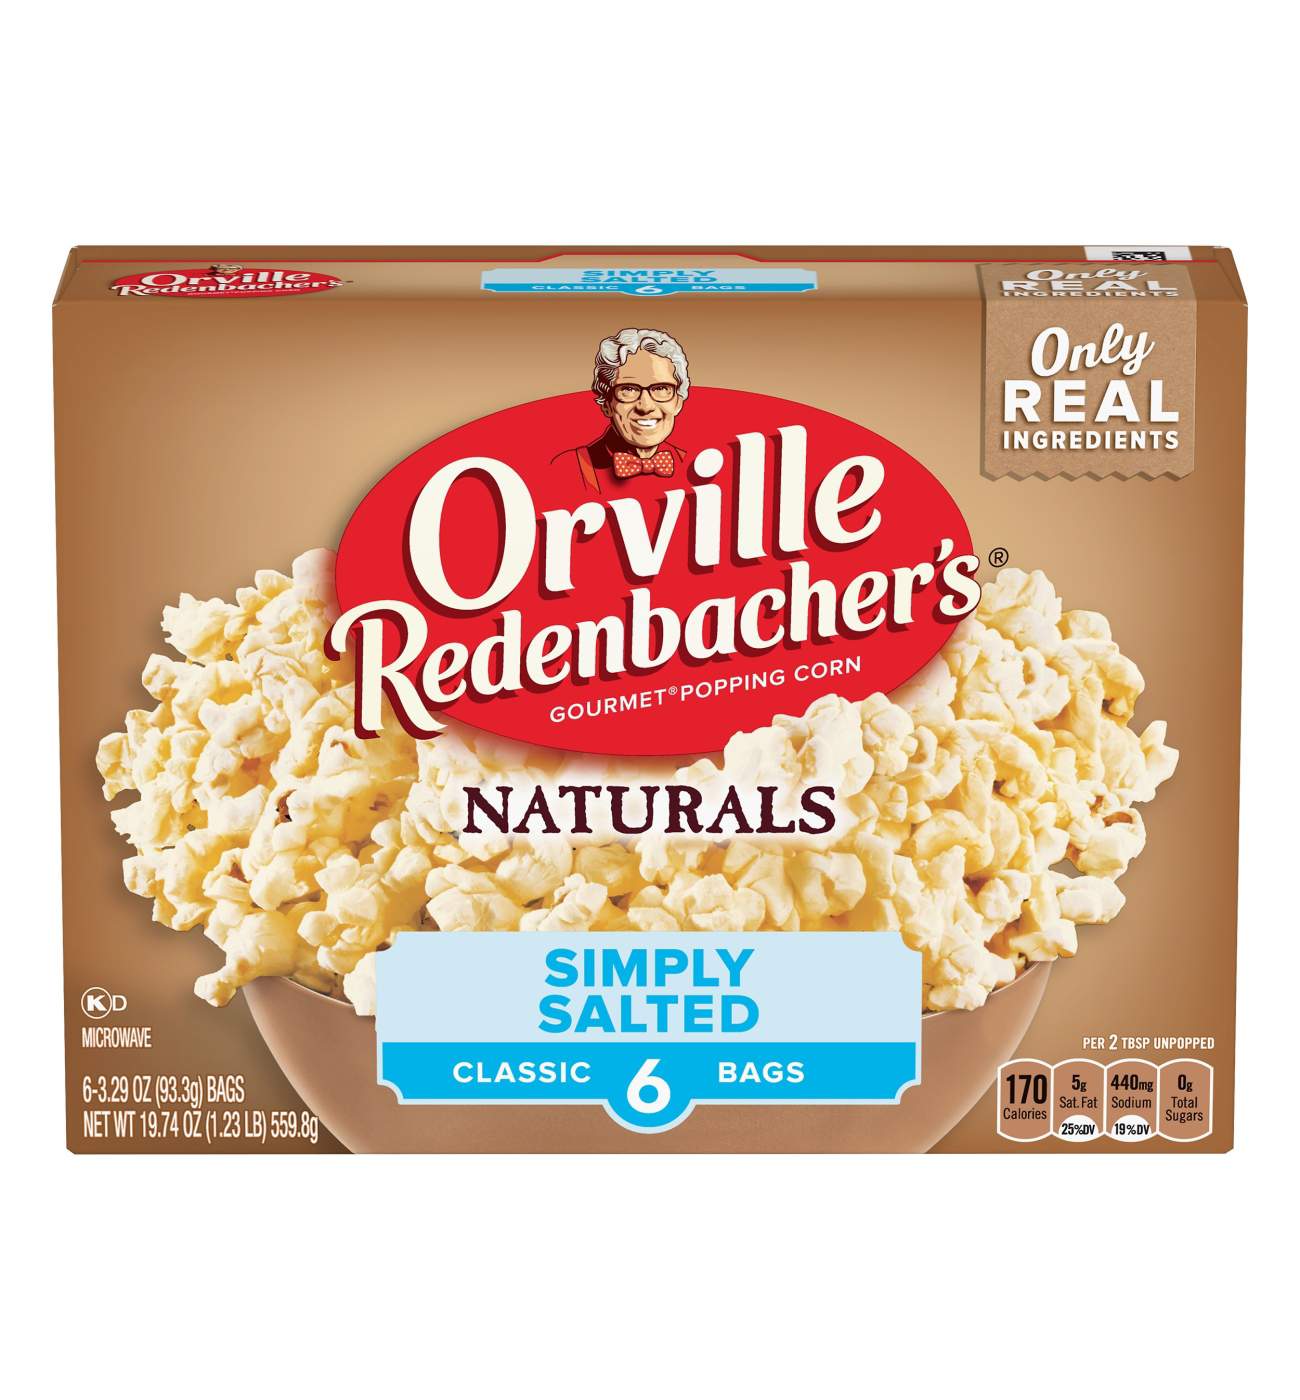 Orville Redenbacher's Naturals Simply Salted Microwave Popcorn; image 1 of 6